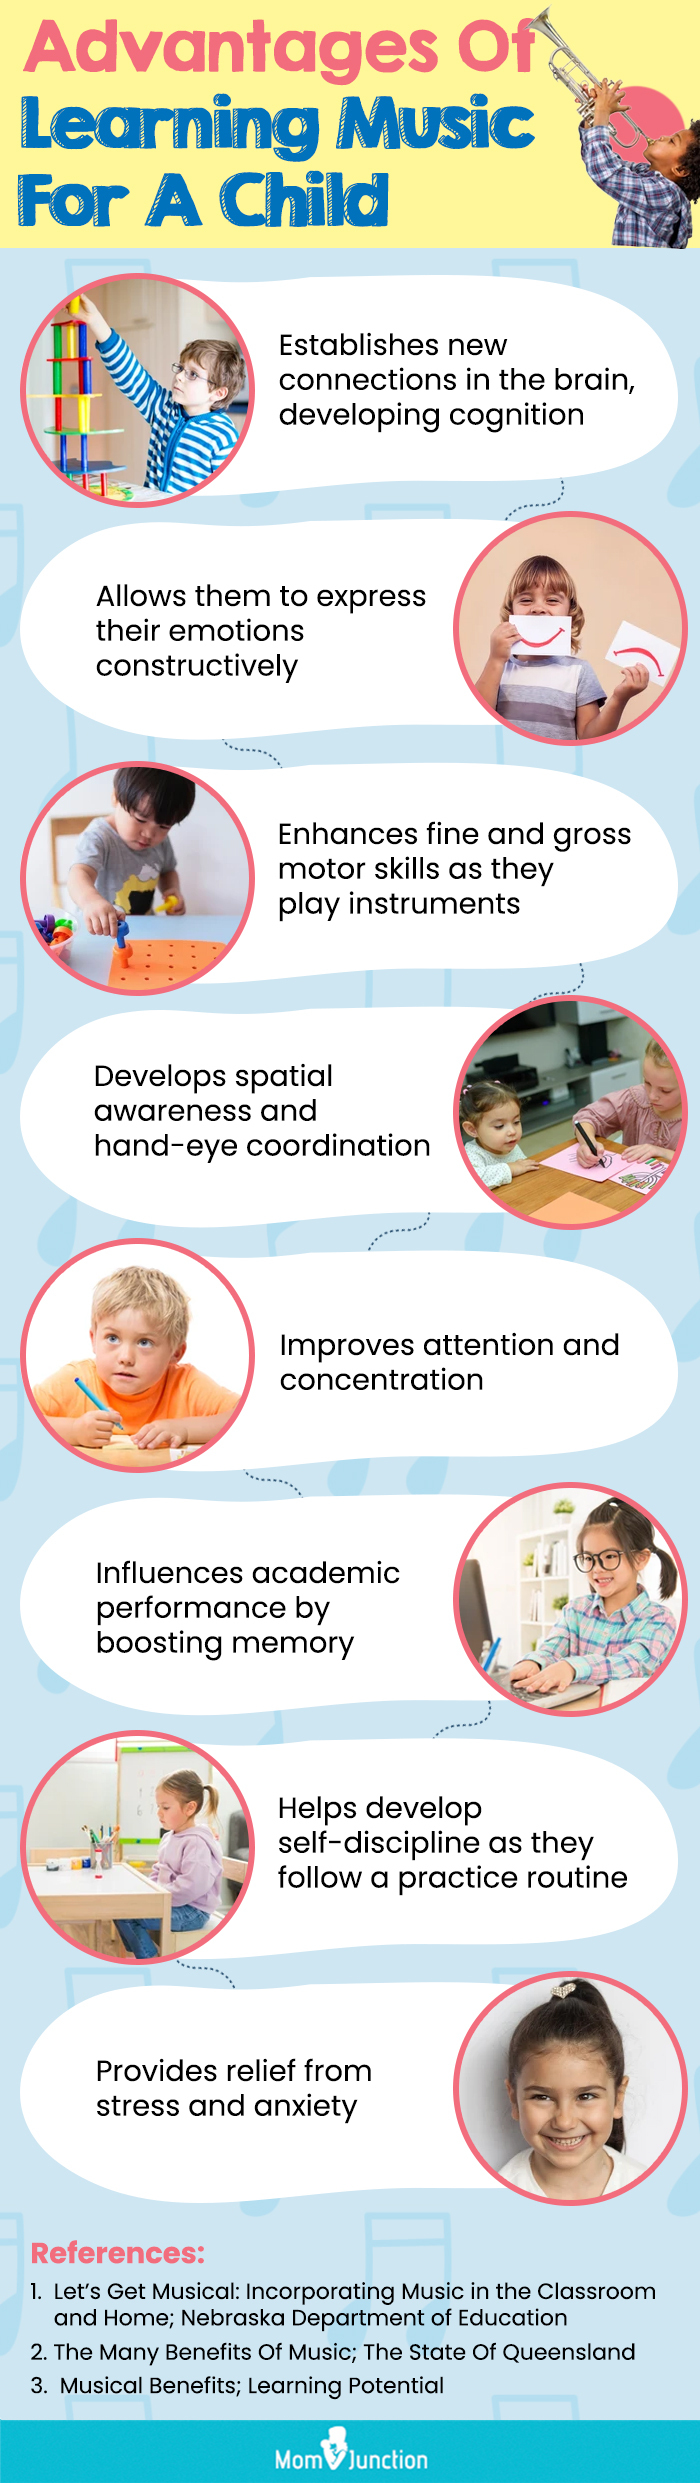 Advantages of learning music for children (infographic)